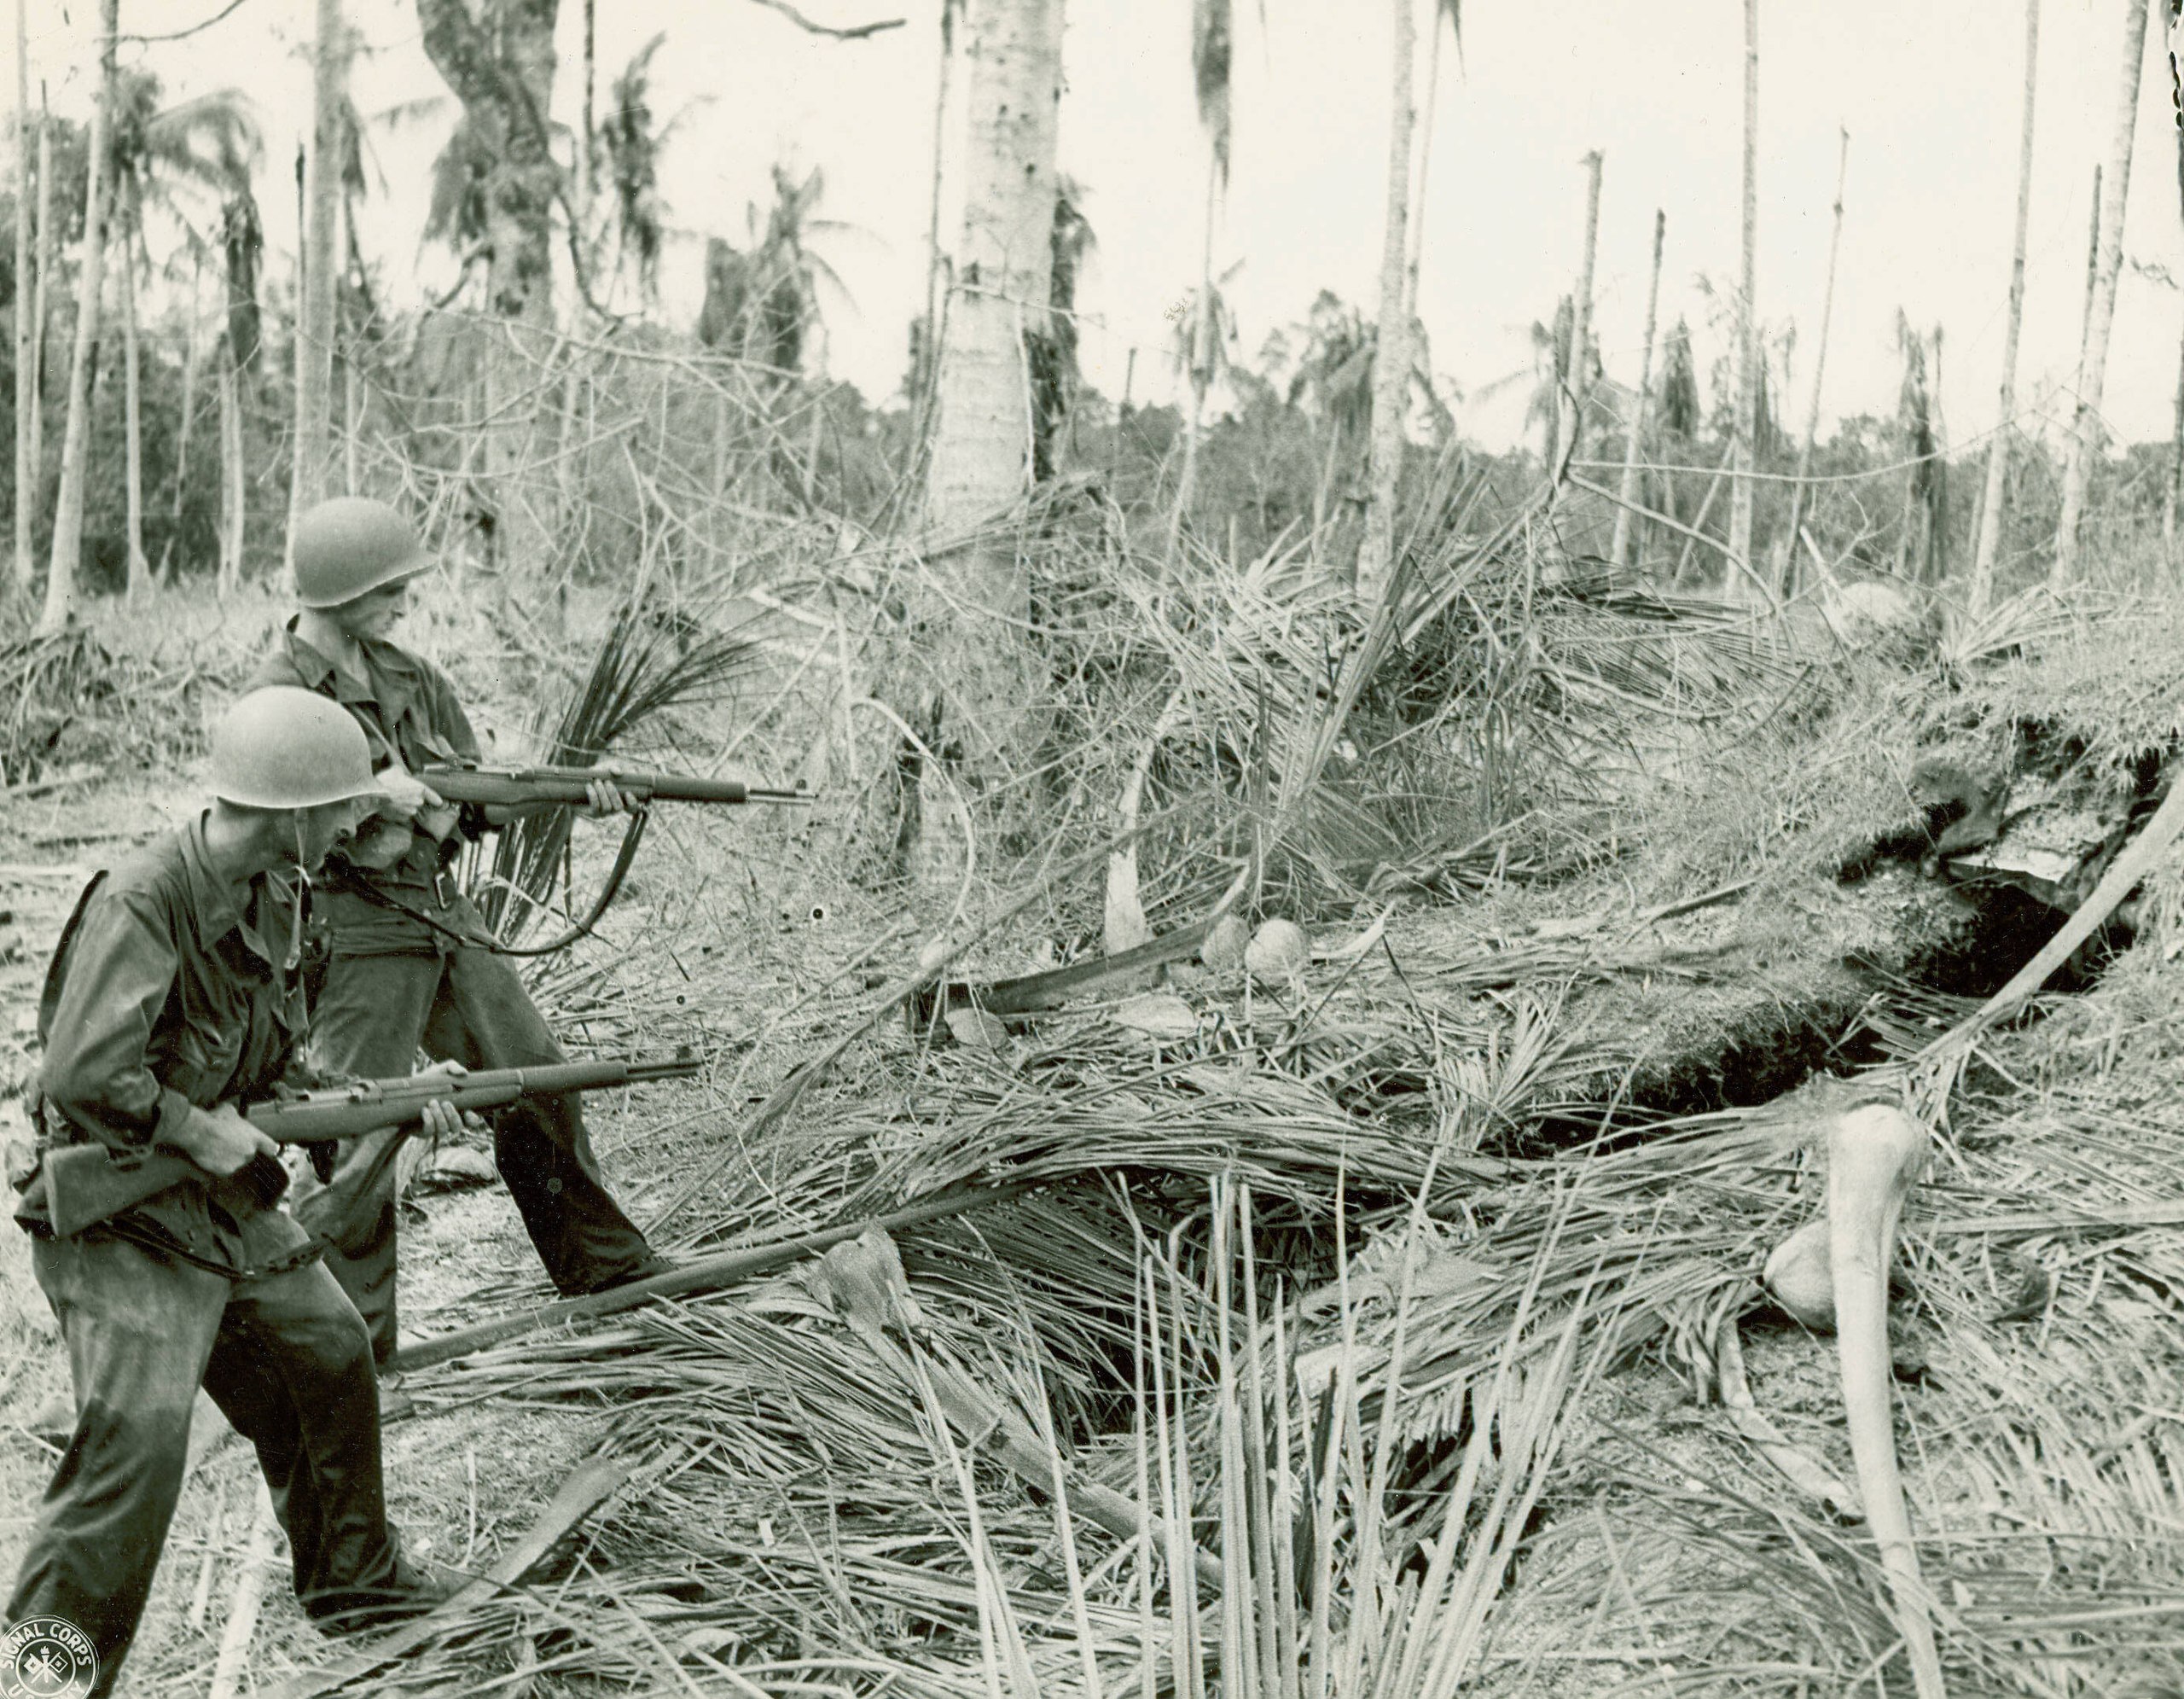 Two soldiers with rifles in Papua New Guinea.